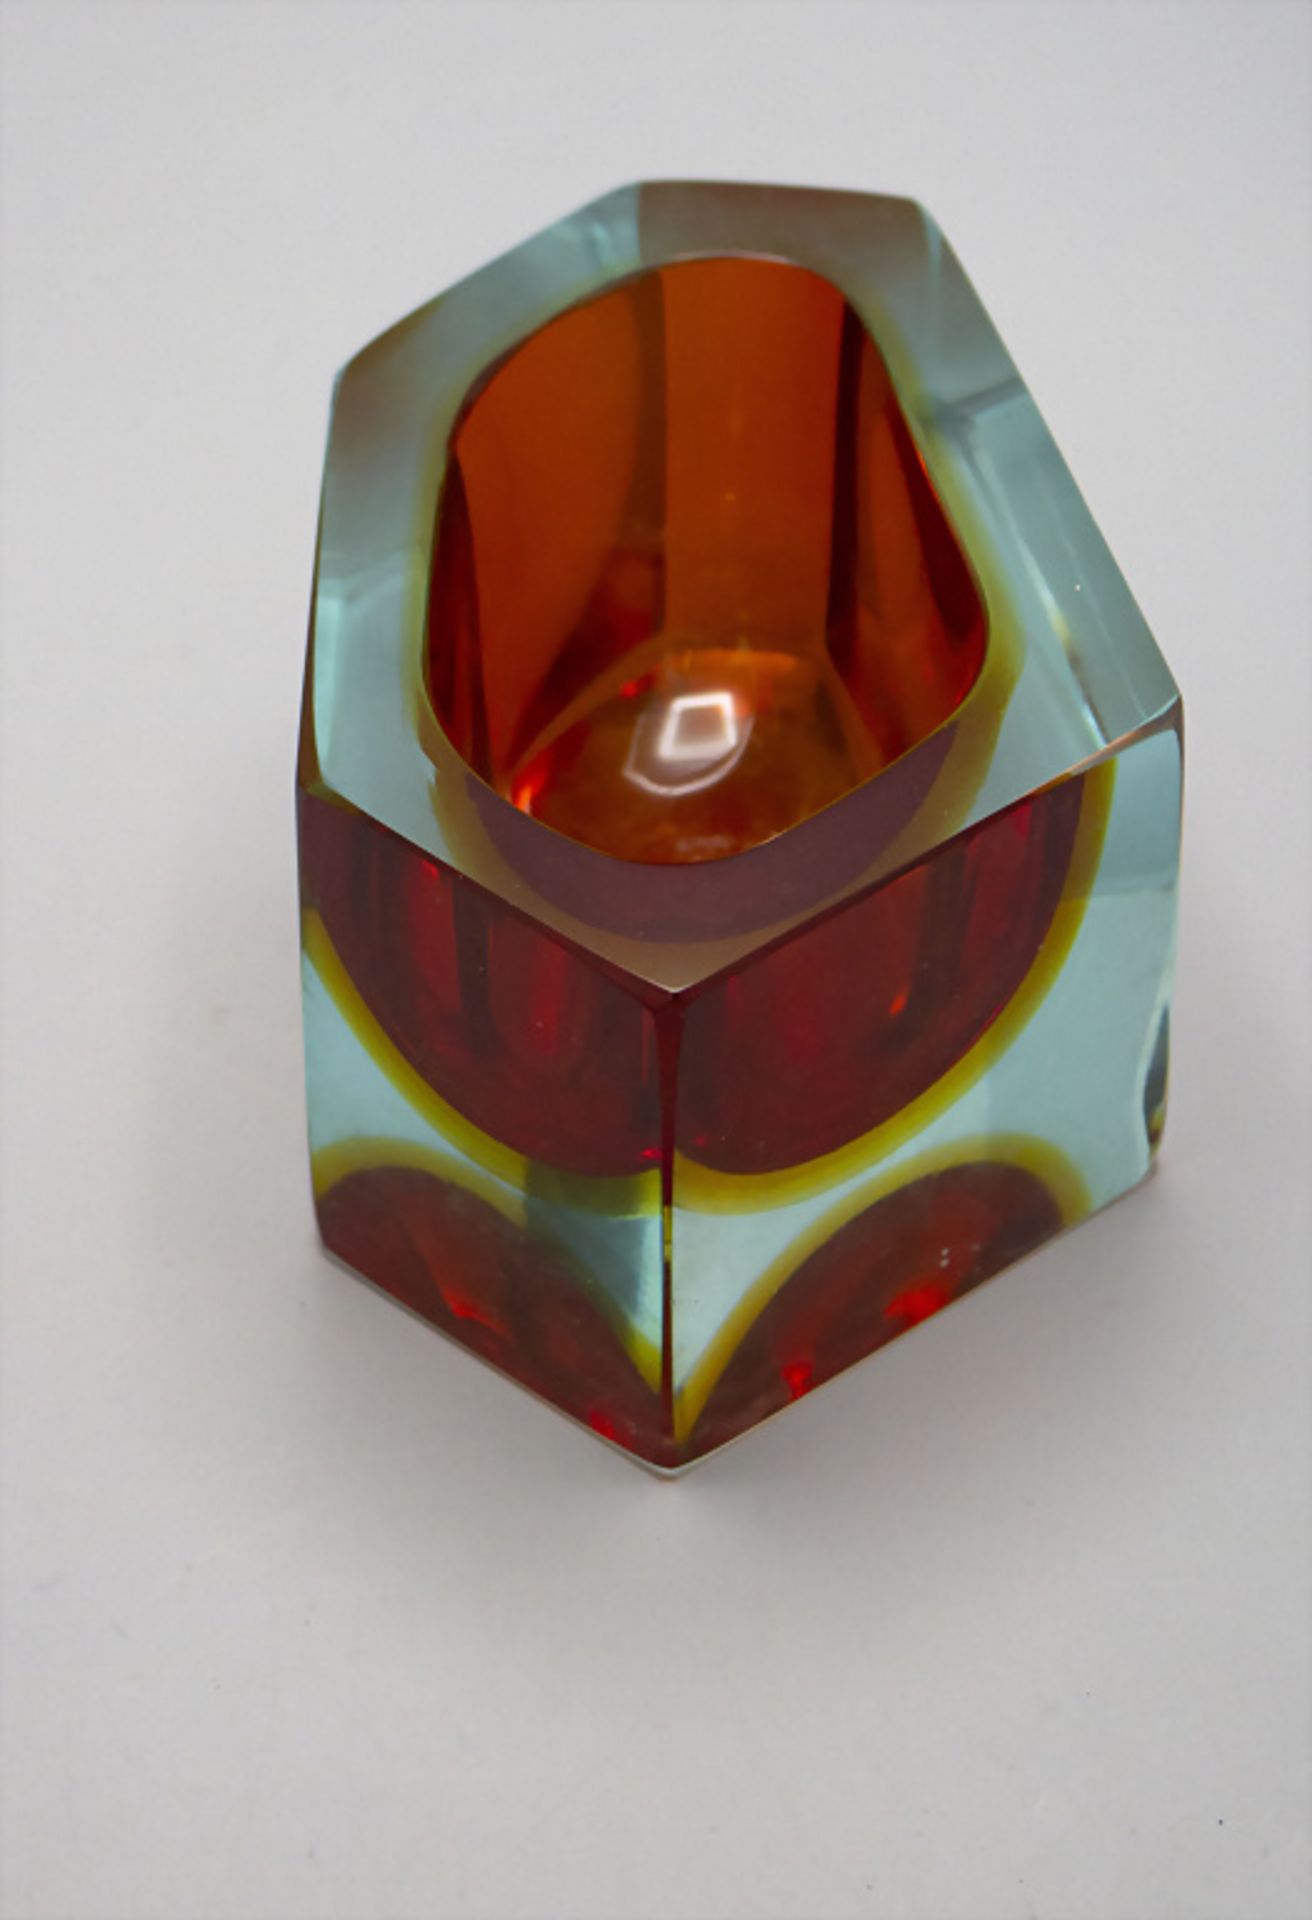 Aschenbecher / An ashtray, wohl Murano, 70/80er Jahre - Image 2 of 4